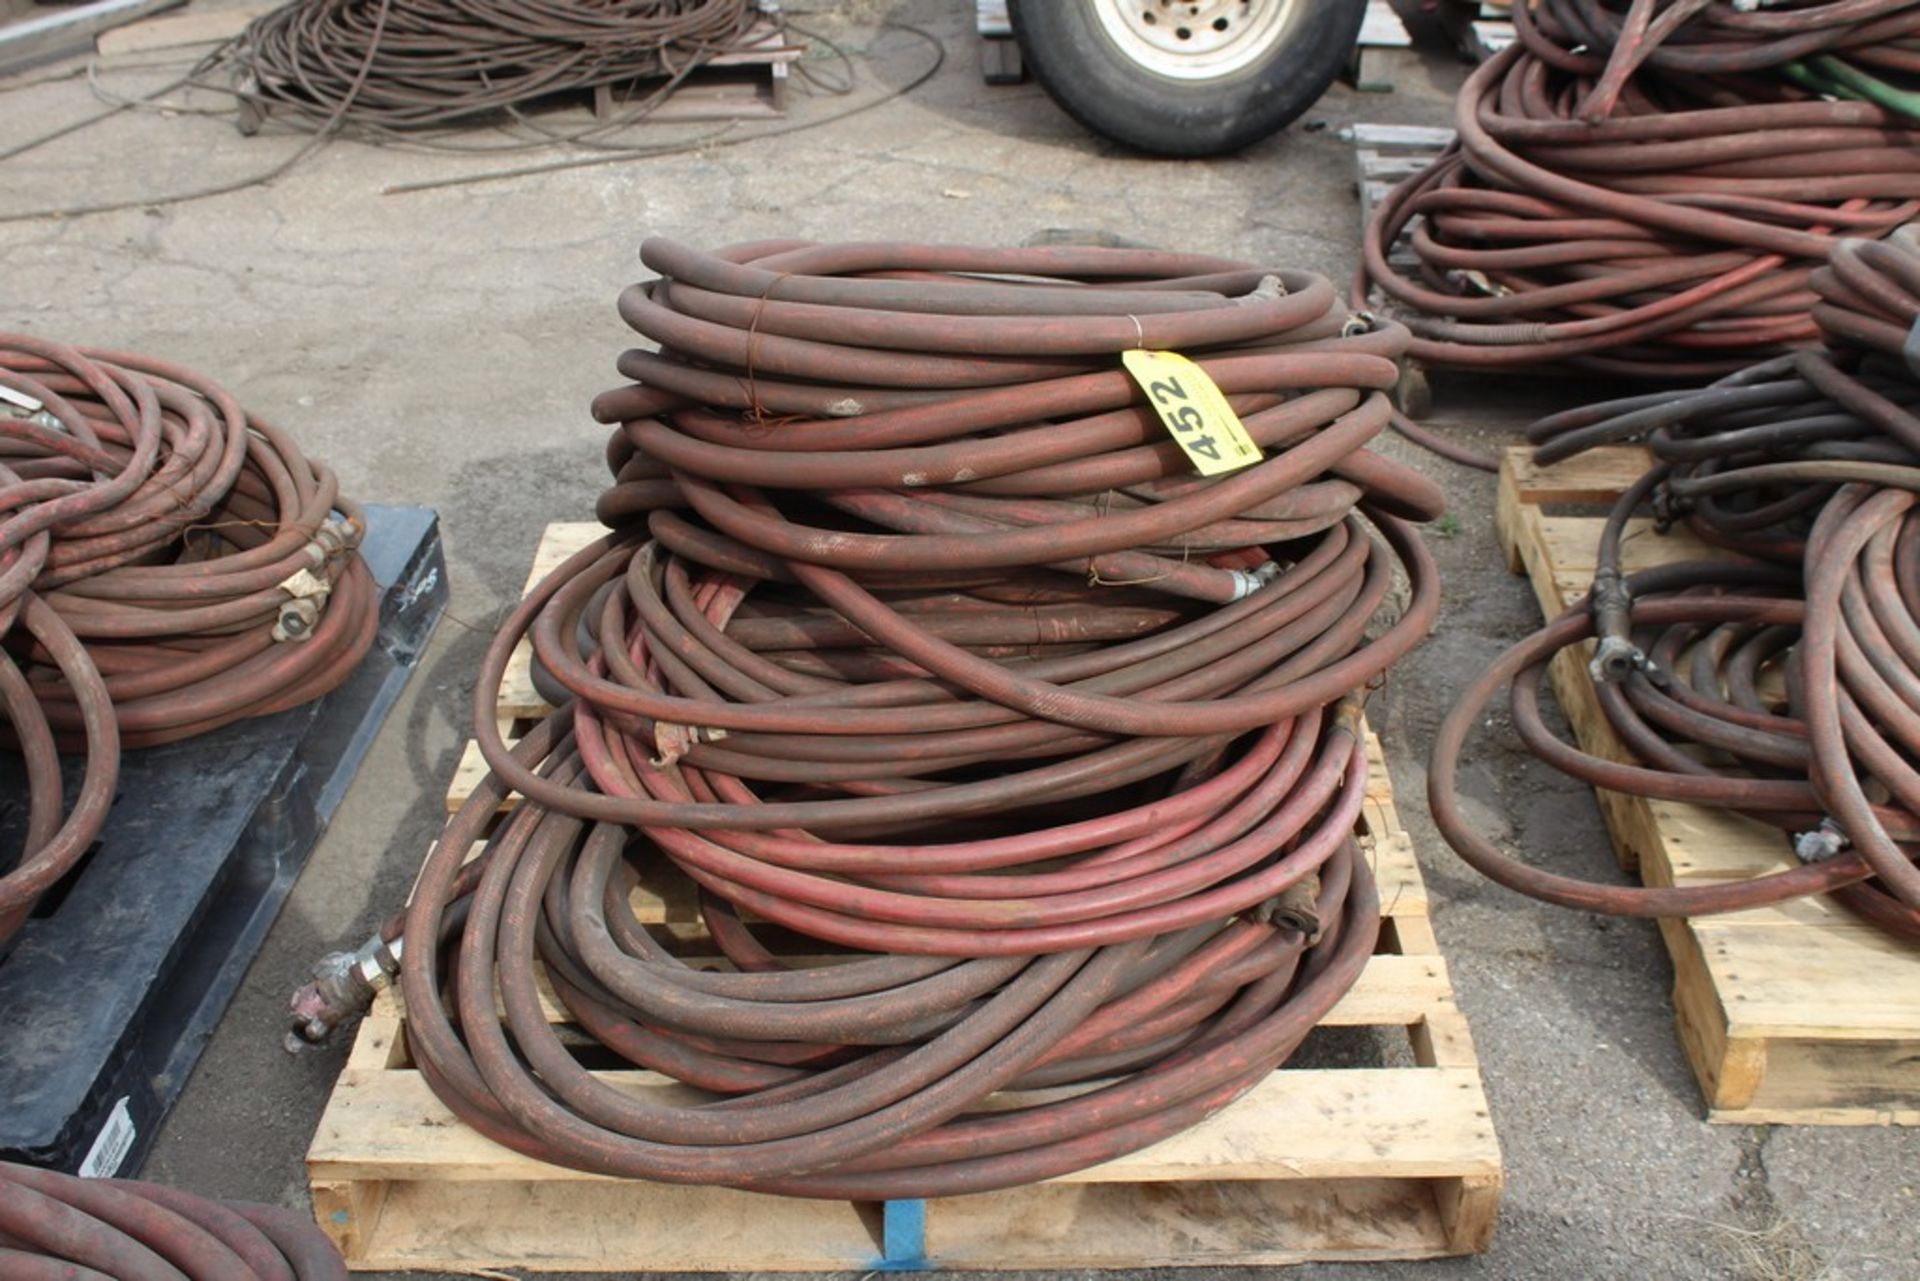 LARGE QUANTITY OF AIR HOSE ON SKID